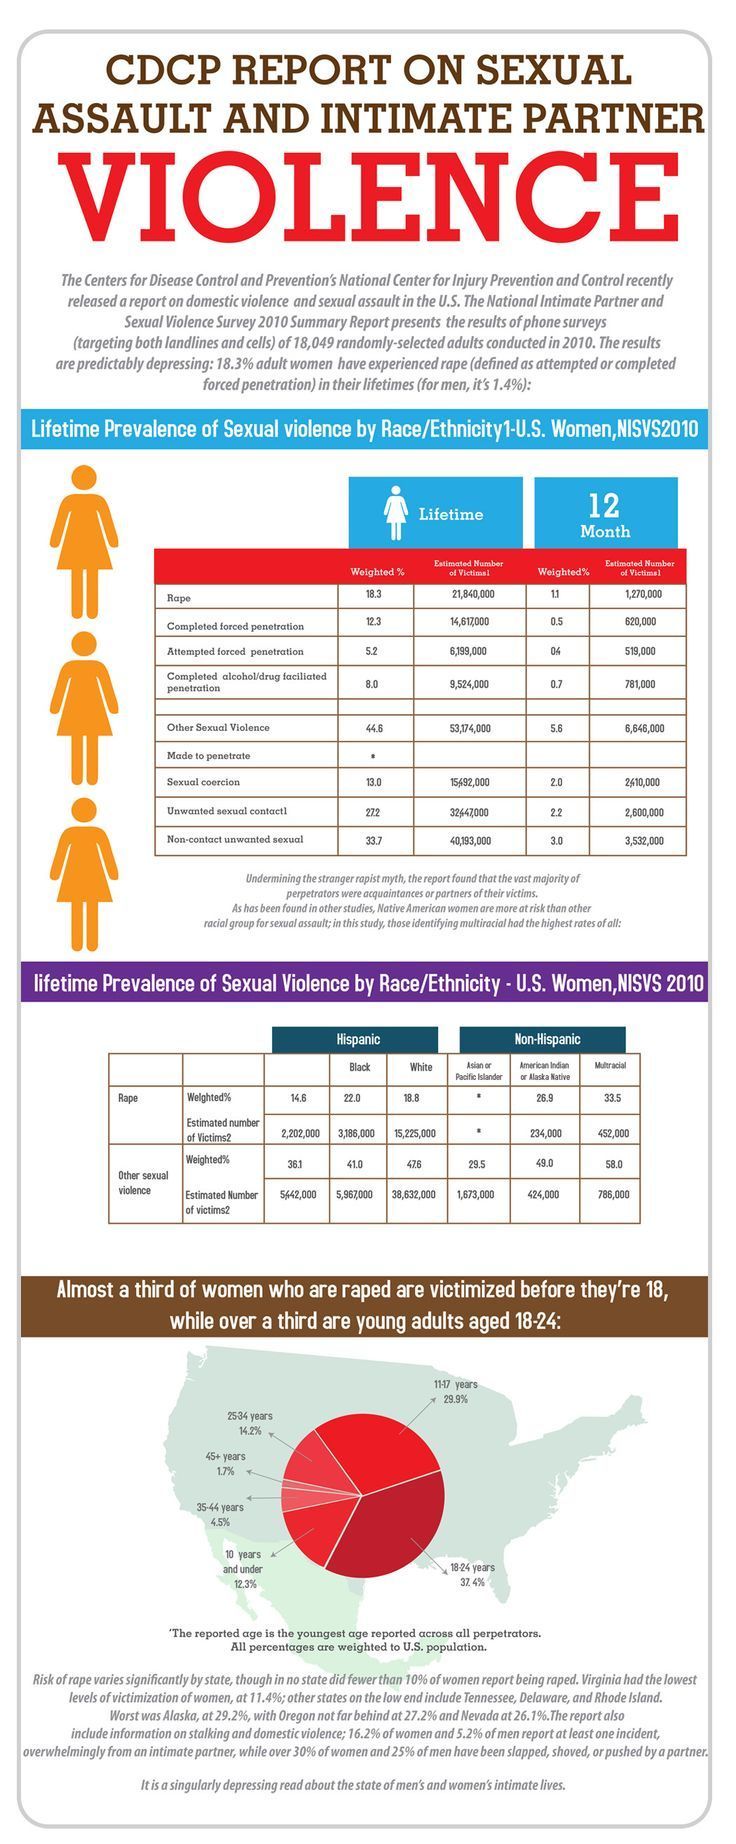 Who 2013 intimate partner violence. Intimate partner violence on women Health stata. Impact of intimate partner violence on women Health across developing Countries stata. Ageing report